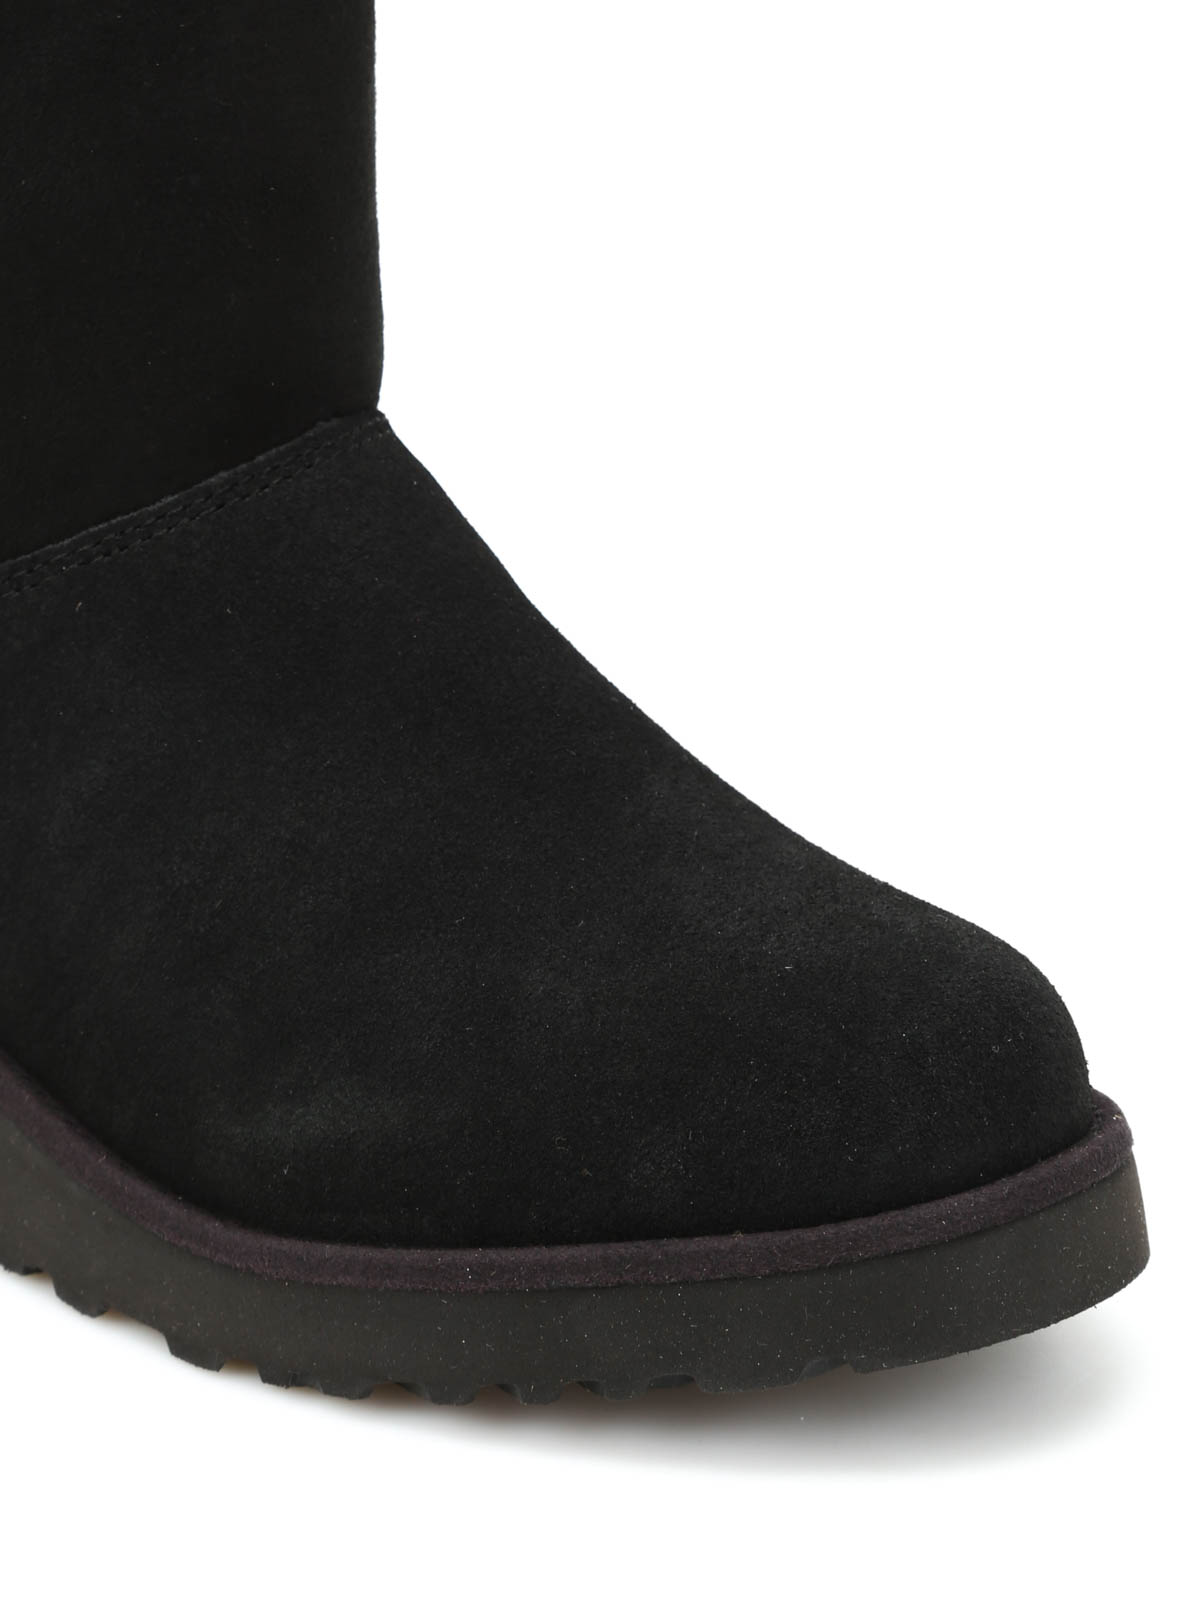 ugg kristin ankle boot